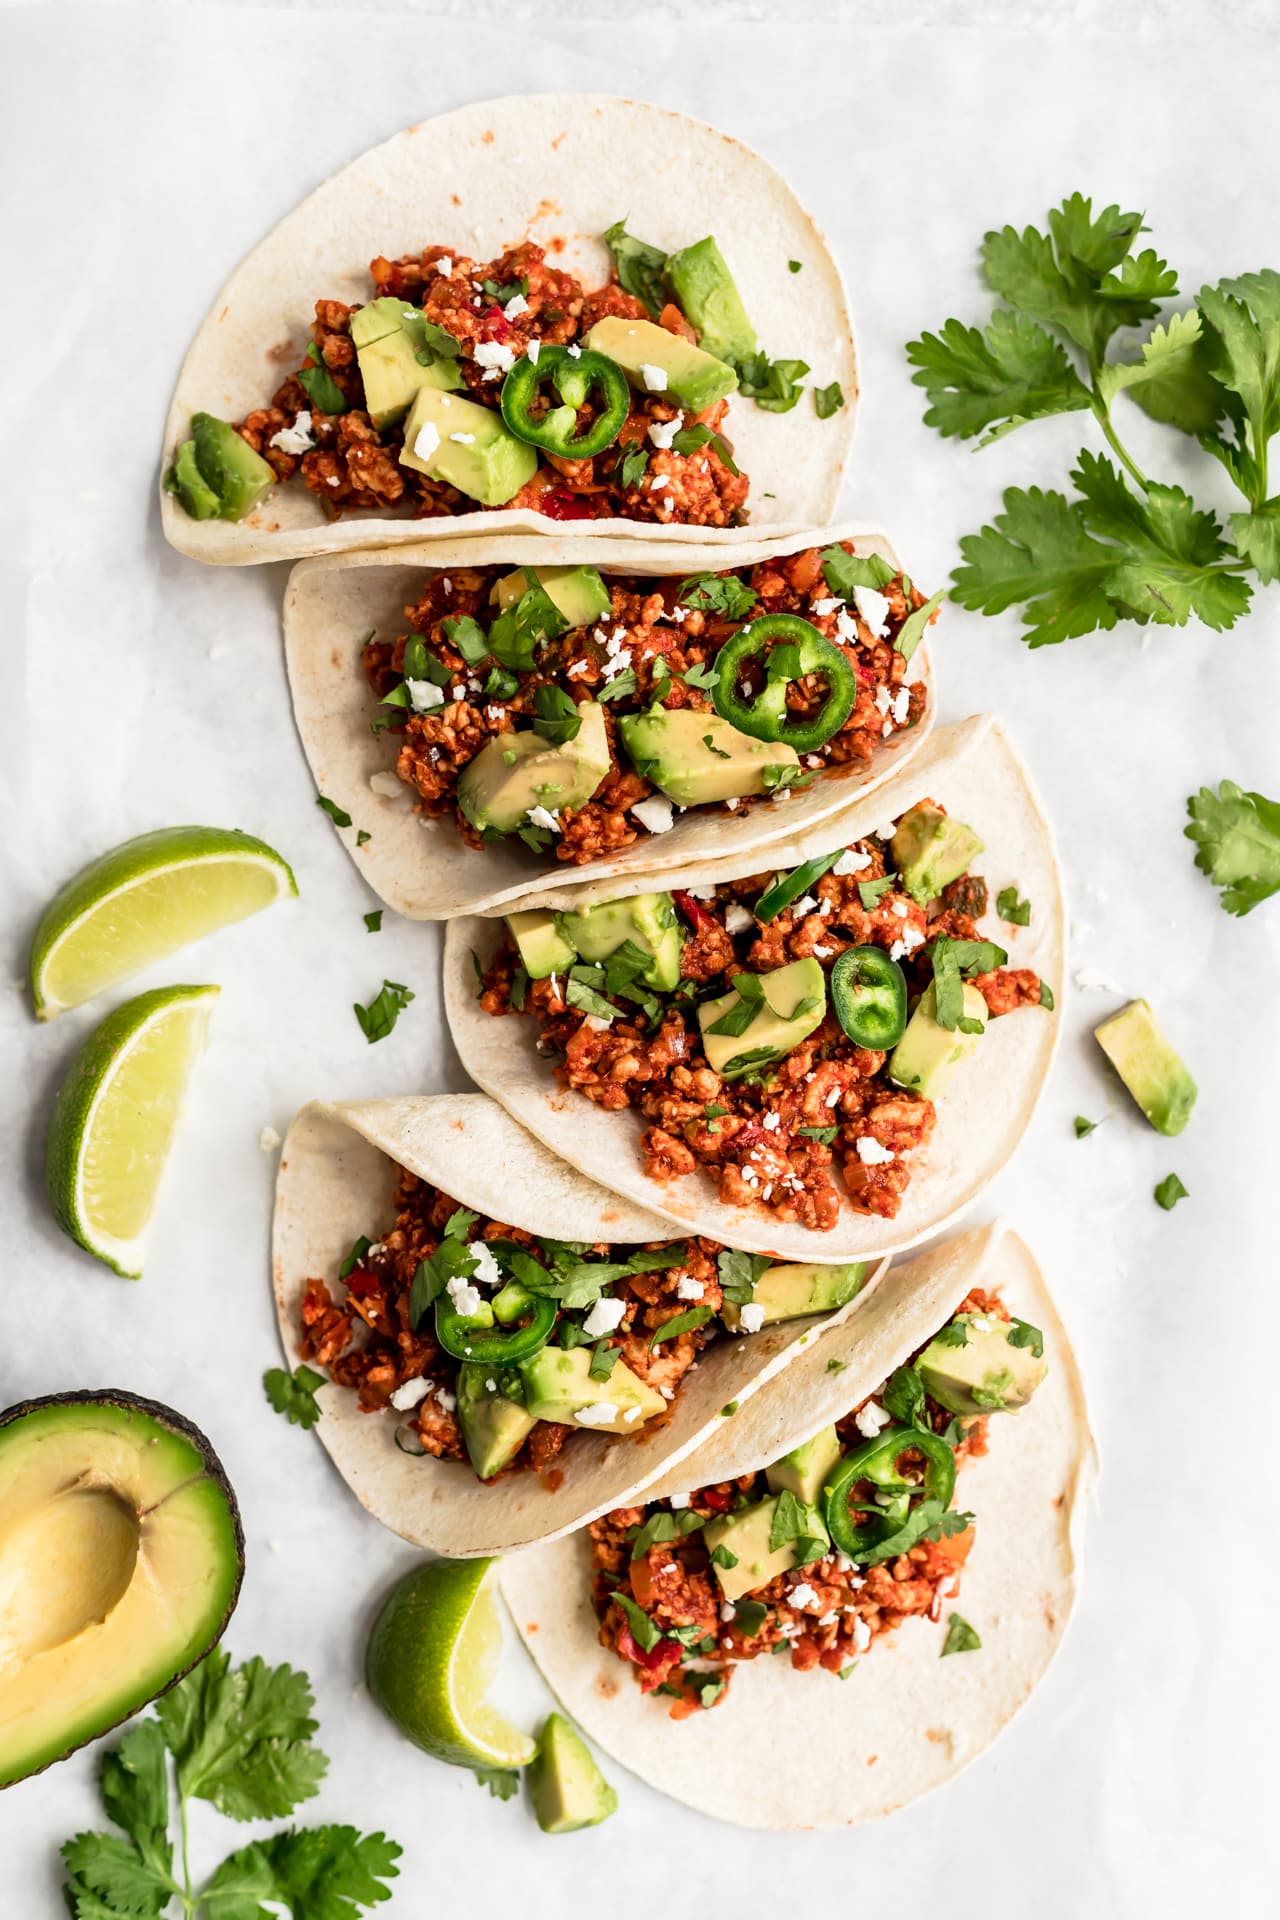 How to Have a Healthy Taco Night That the Whole Family Will Love